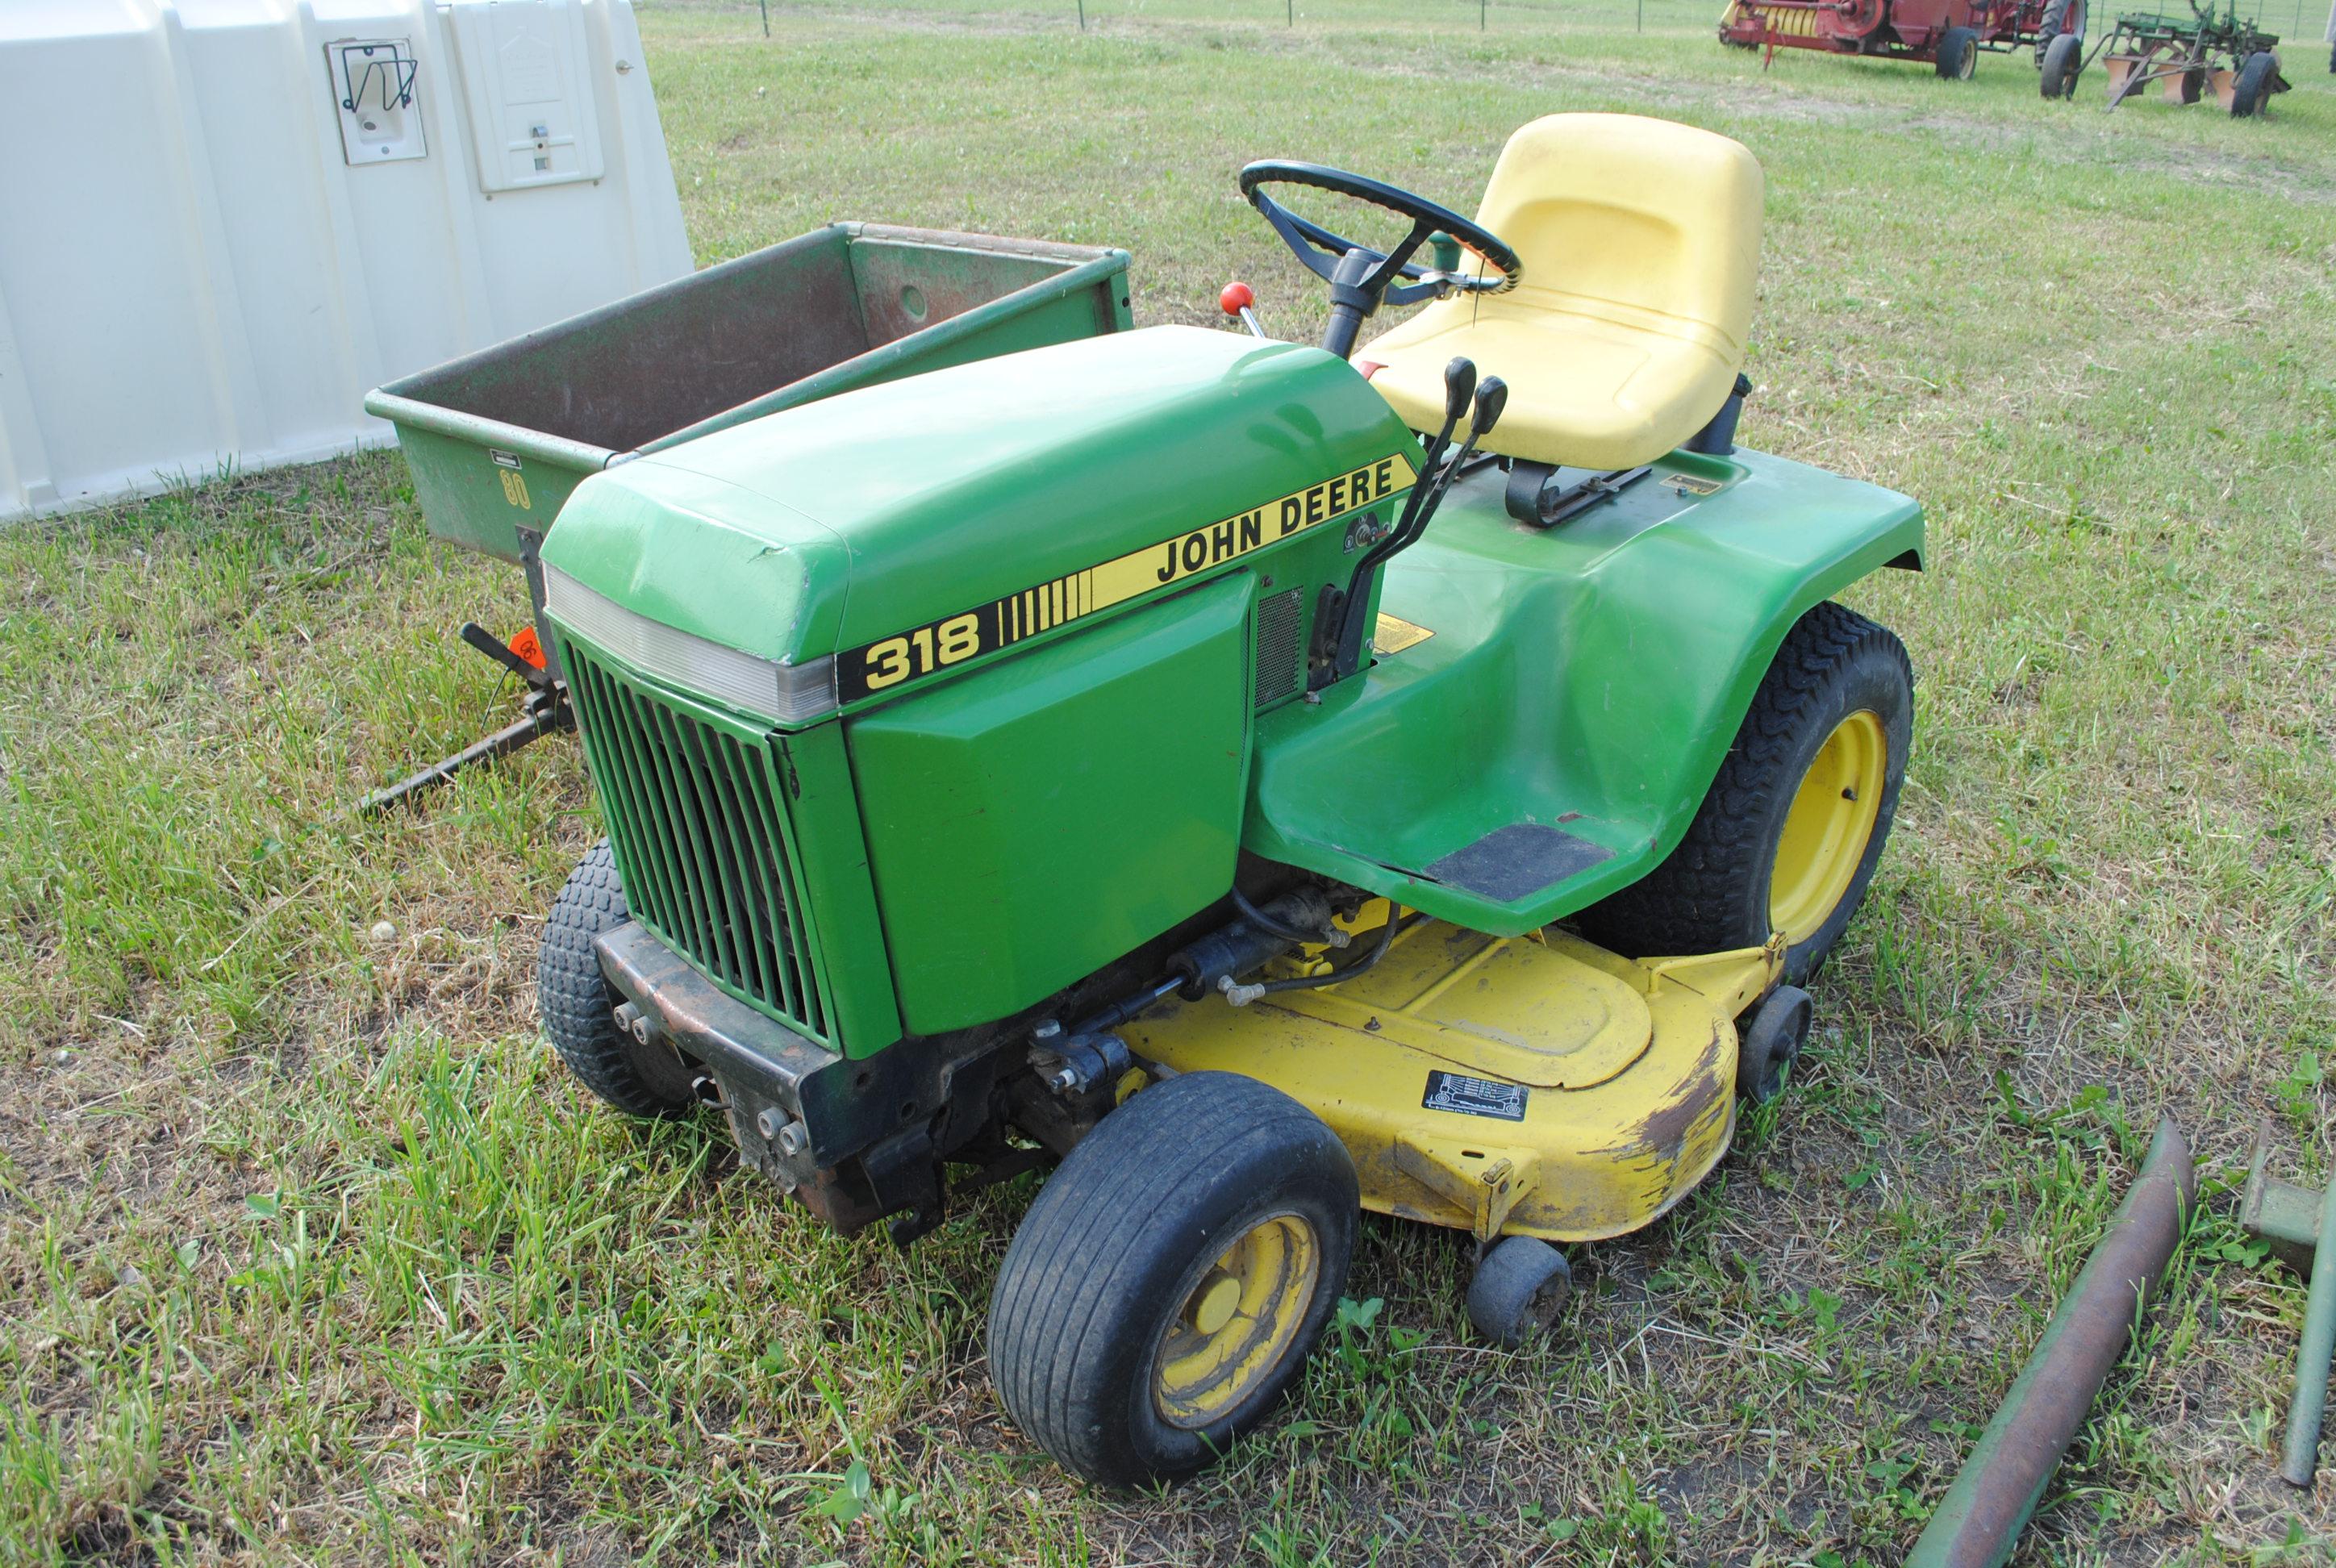 John Deere 318 mower with 50" deck, hydraulics plumbed to front, rear lift, hydraulic lift, runs & d